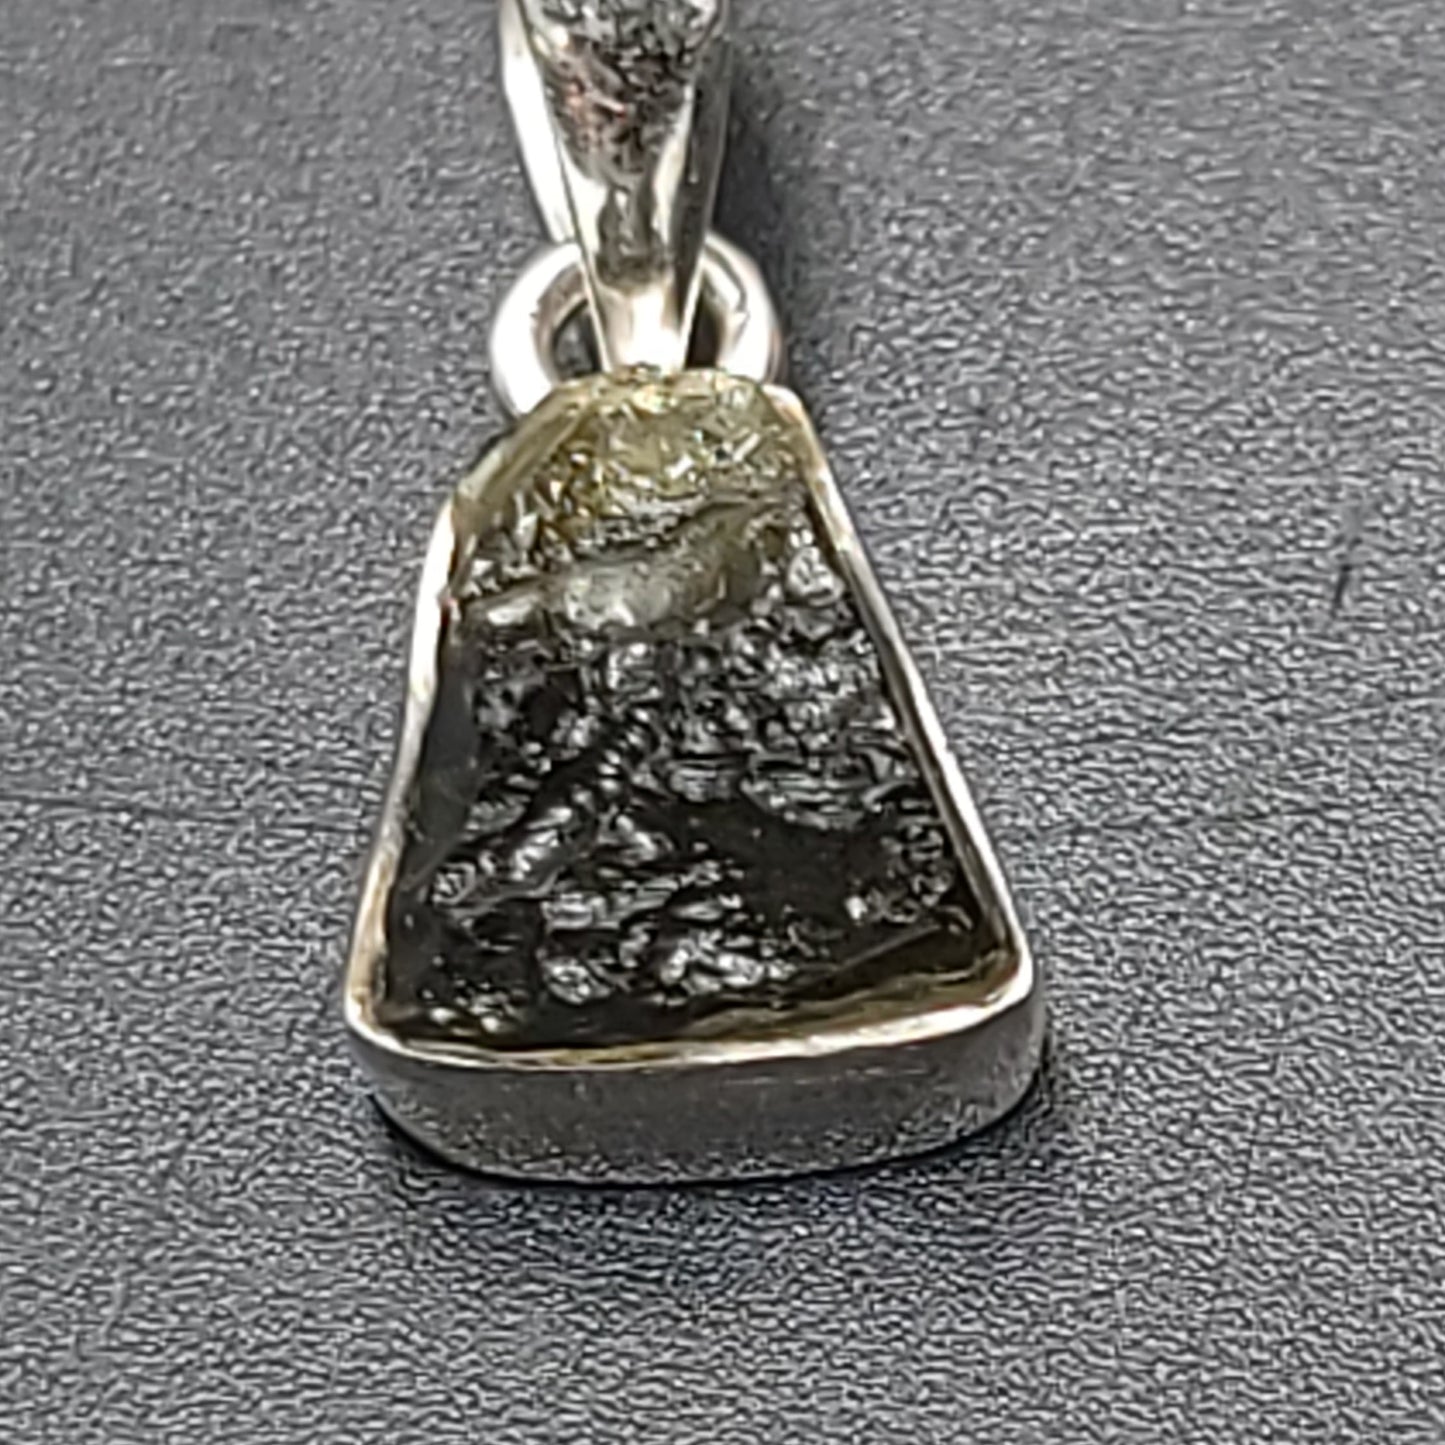 Moldavite Pendant Sterling Silver Rough Free Form - Elevated Metaphysical